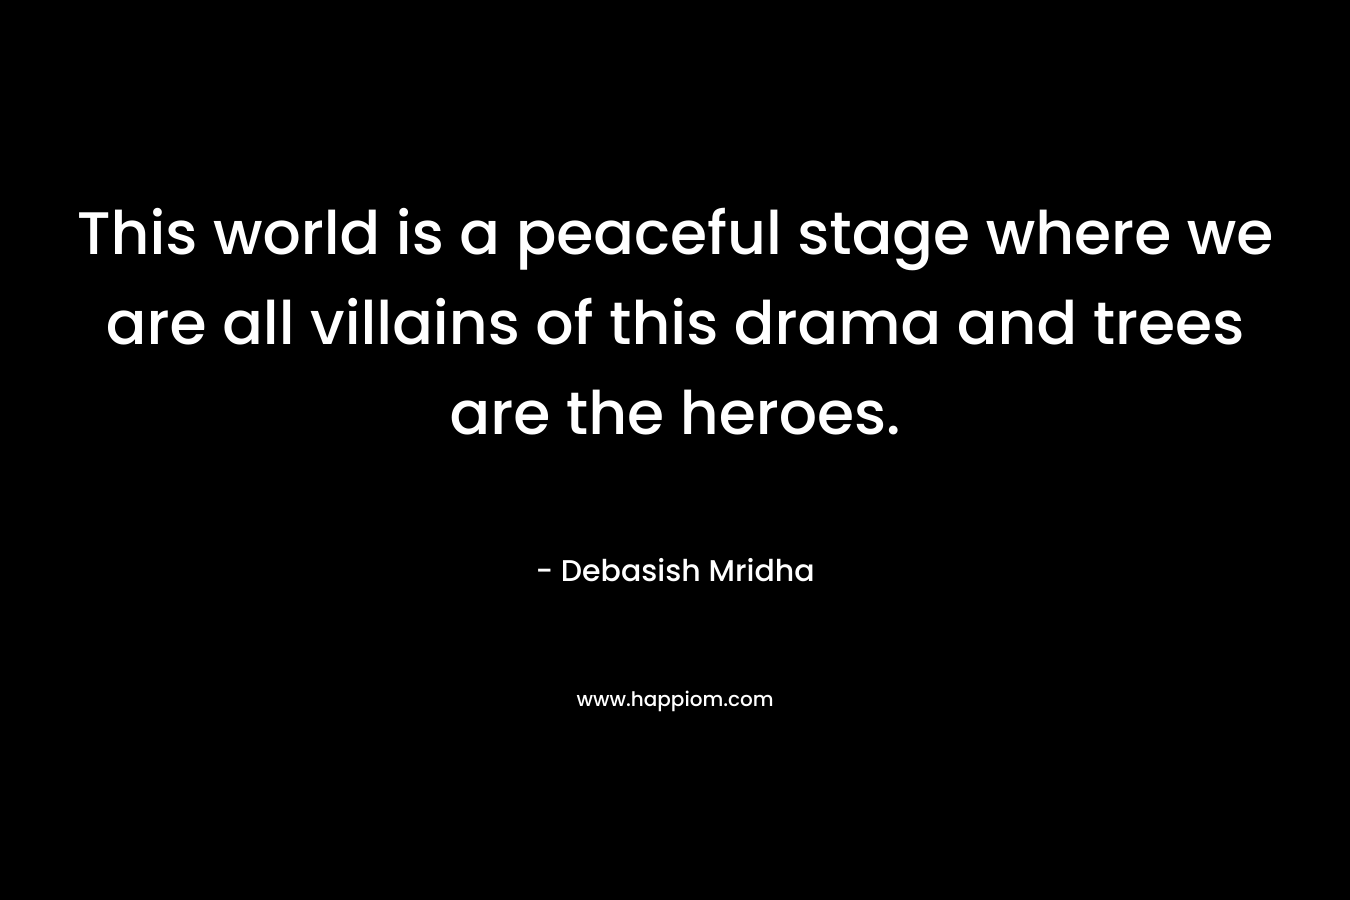 This world is a peaceful stage where we are all villains of this drama and trees are the heroes. – Debasish Mridha